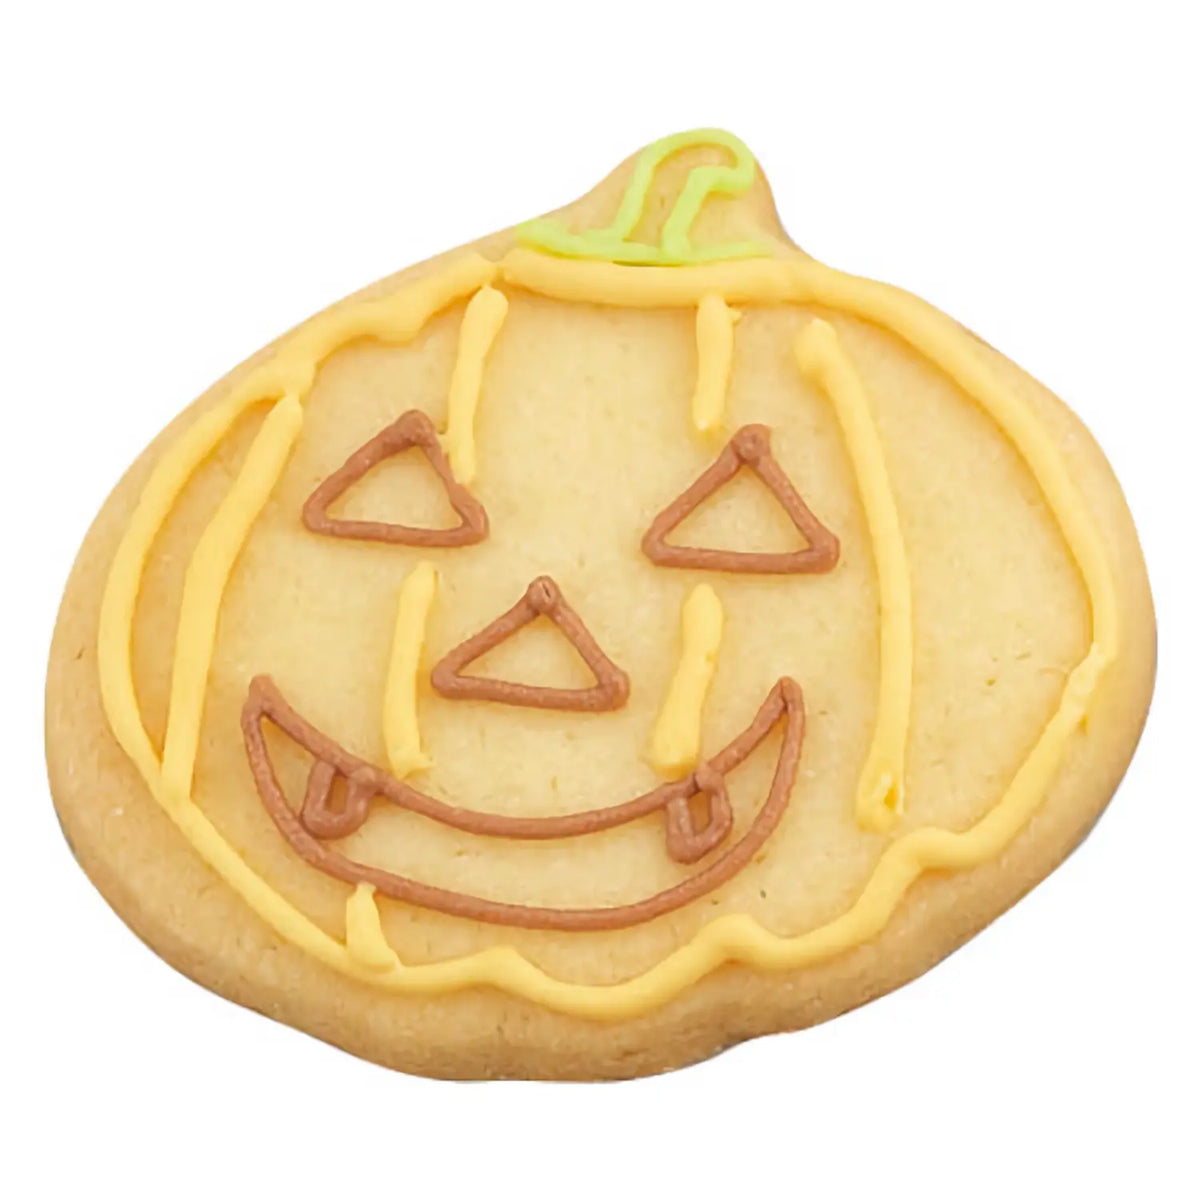 TIGERCROWN Cake Land Stainless Steel Cookie Cutter Pumpkin